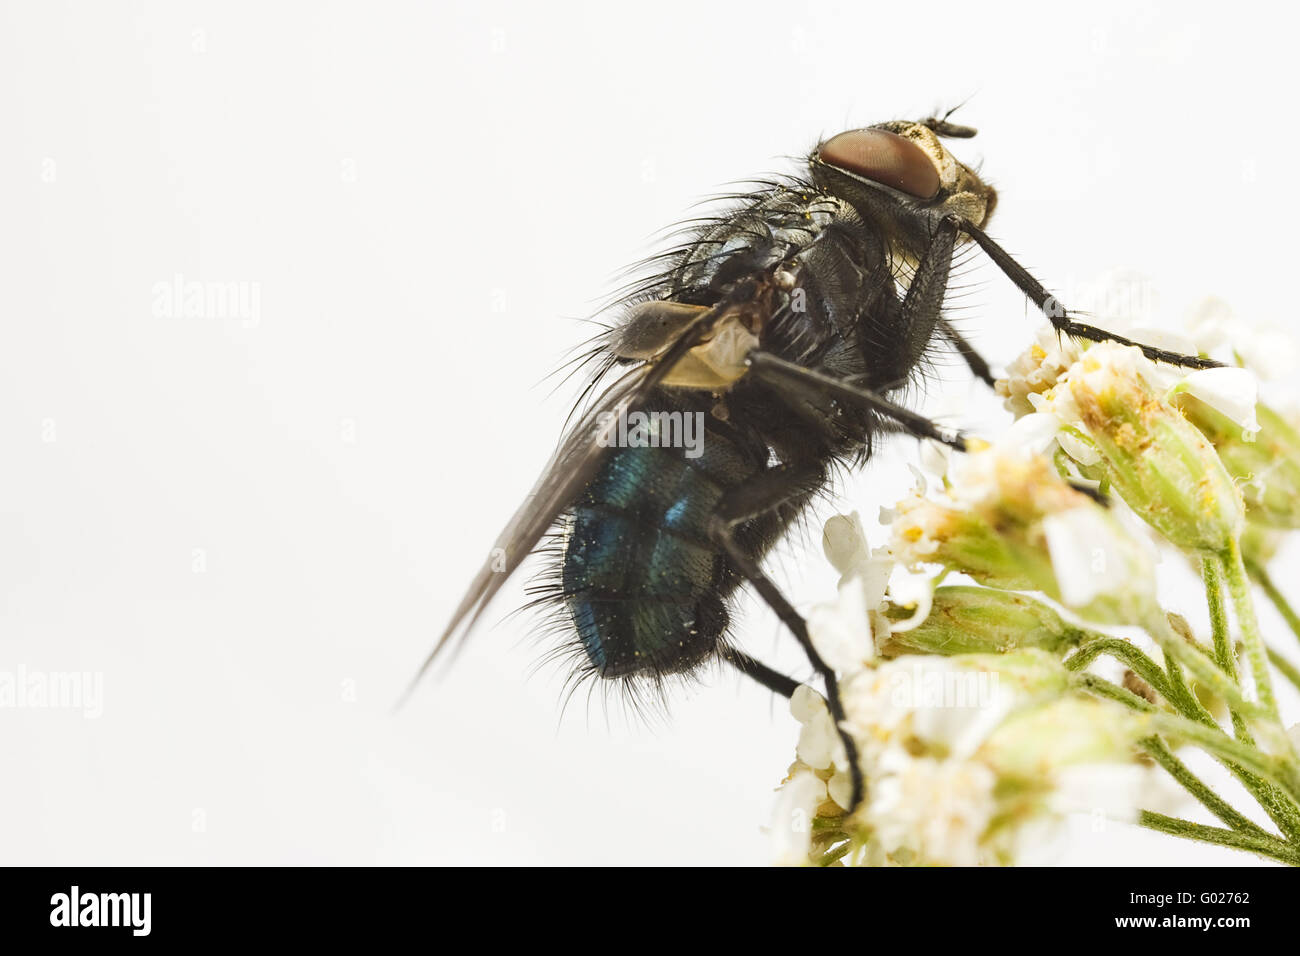 fly of the dead (Cynomyia mortuorum) Stock Photo